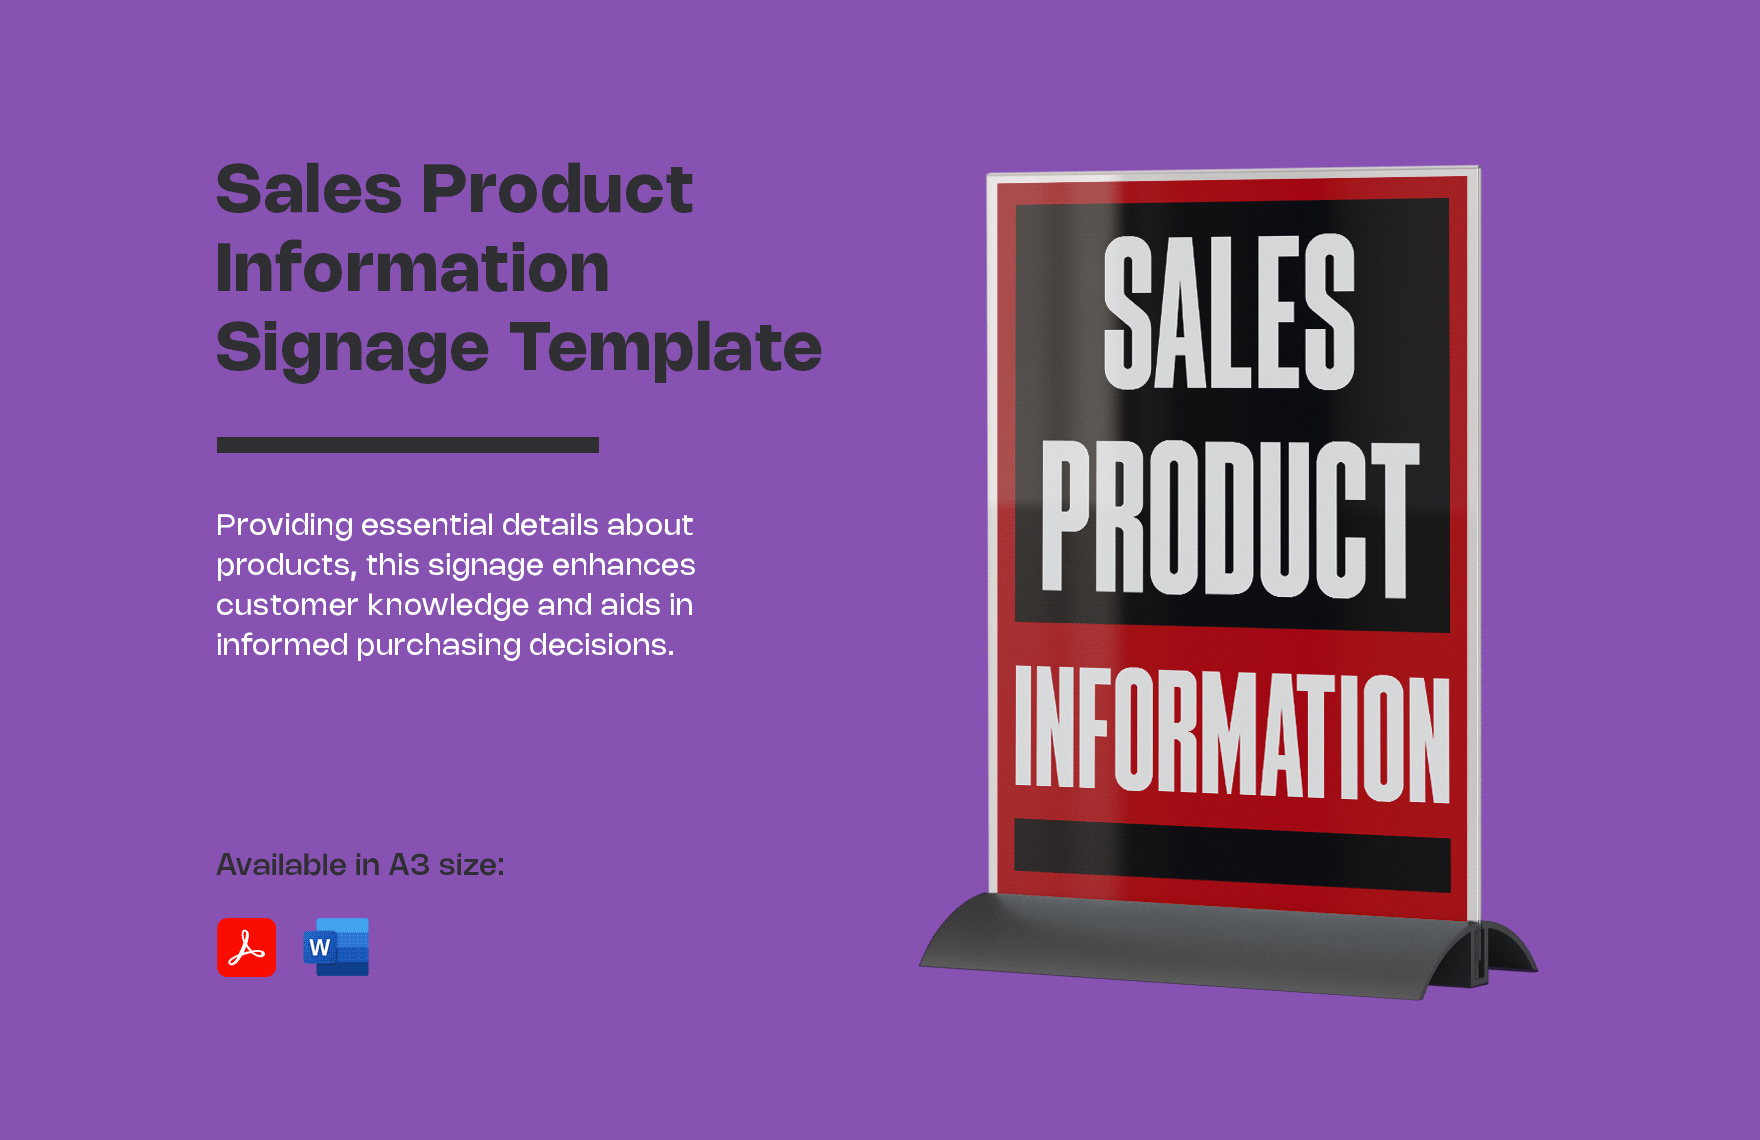 Sales Product Information Signage Template